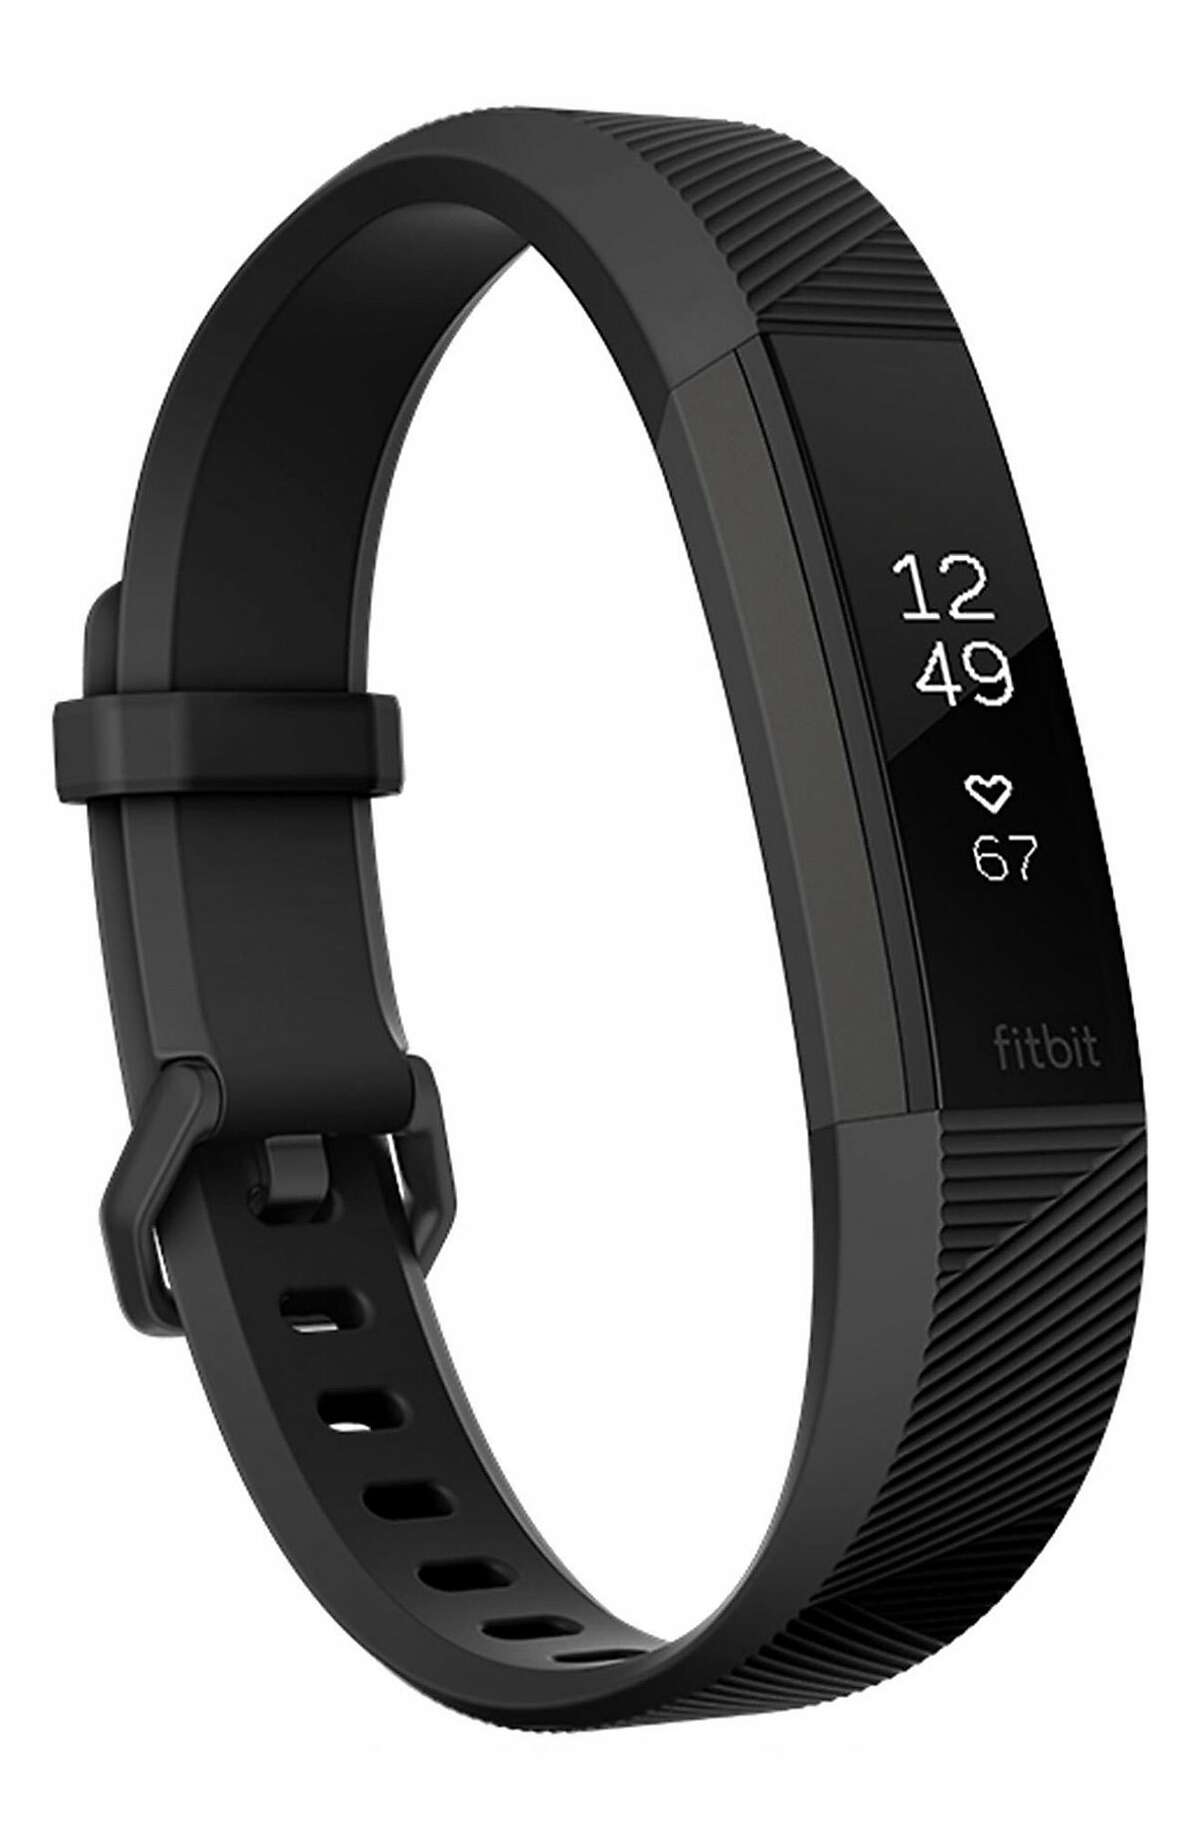 Fitbit offers key clue to slain San Jose woman s alleged 90 year old killer